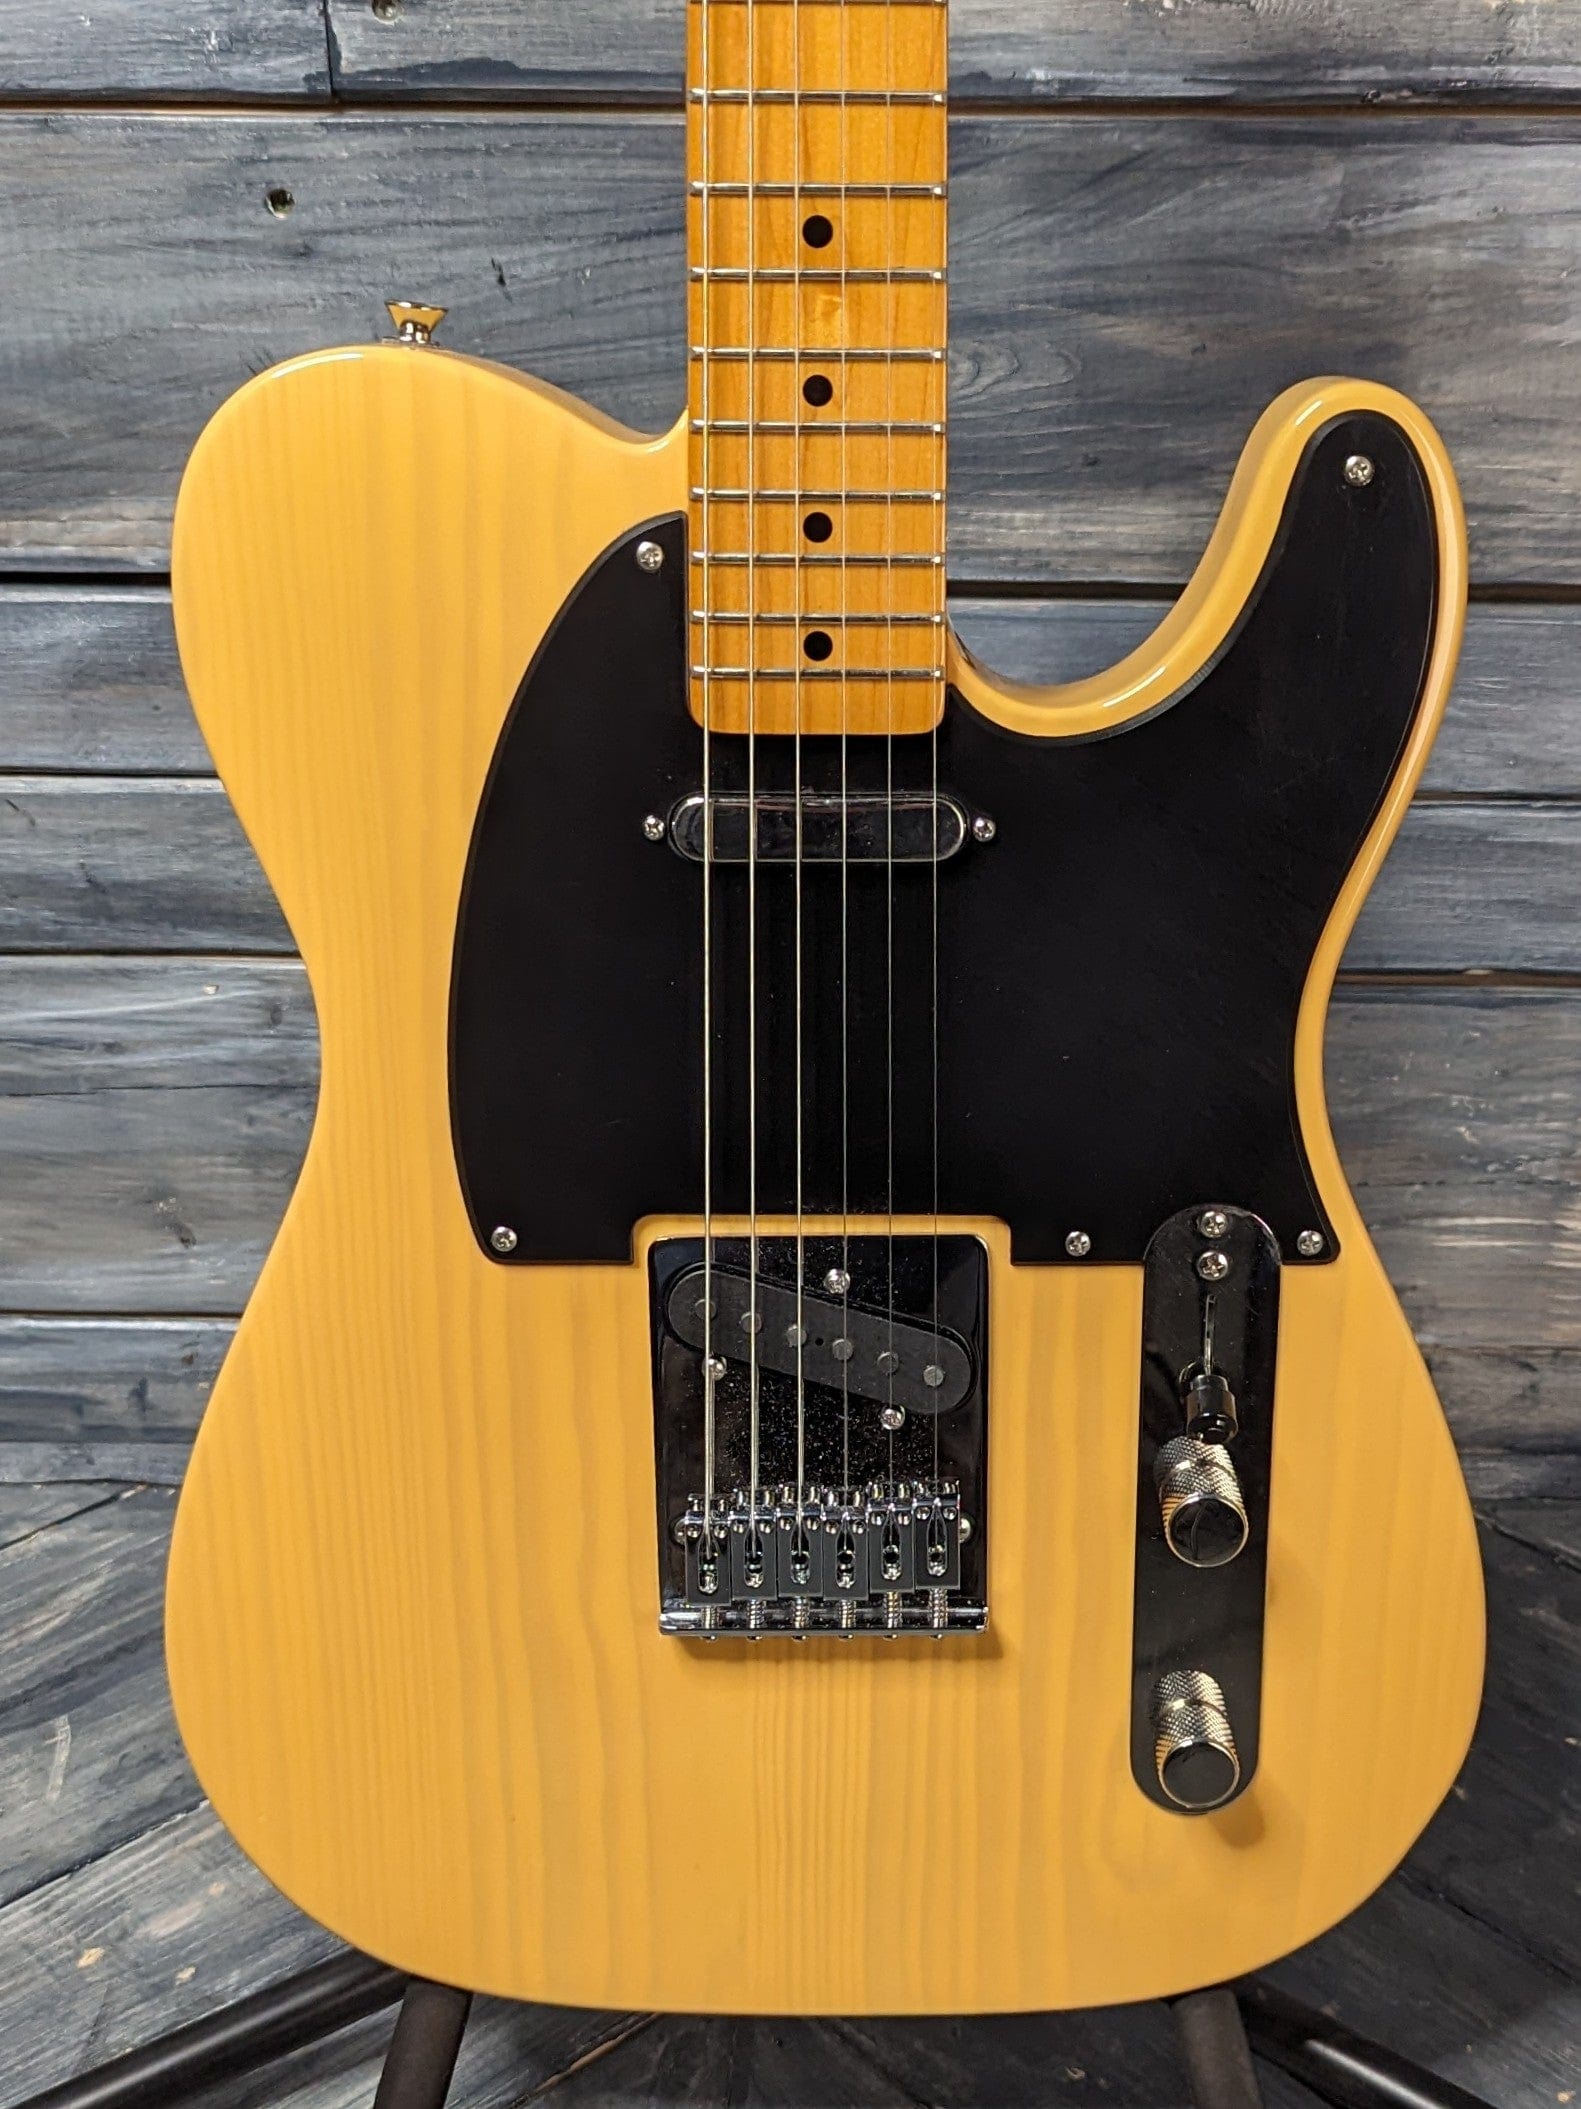 Used Squier Telecaster close up of the body